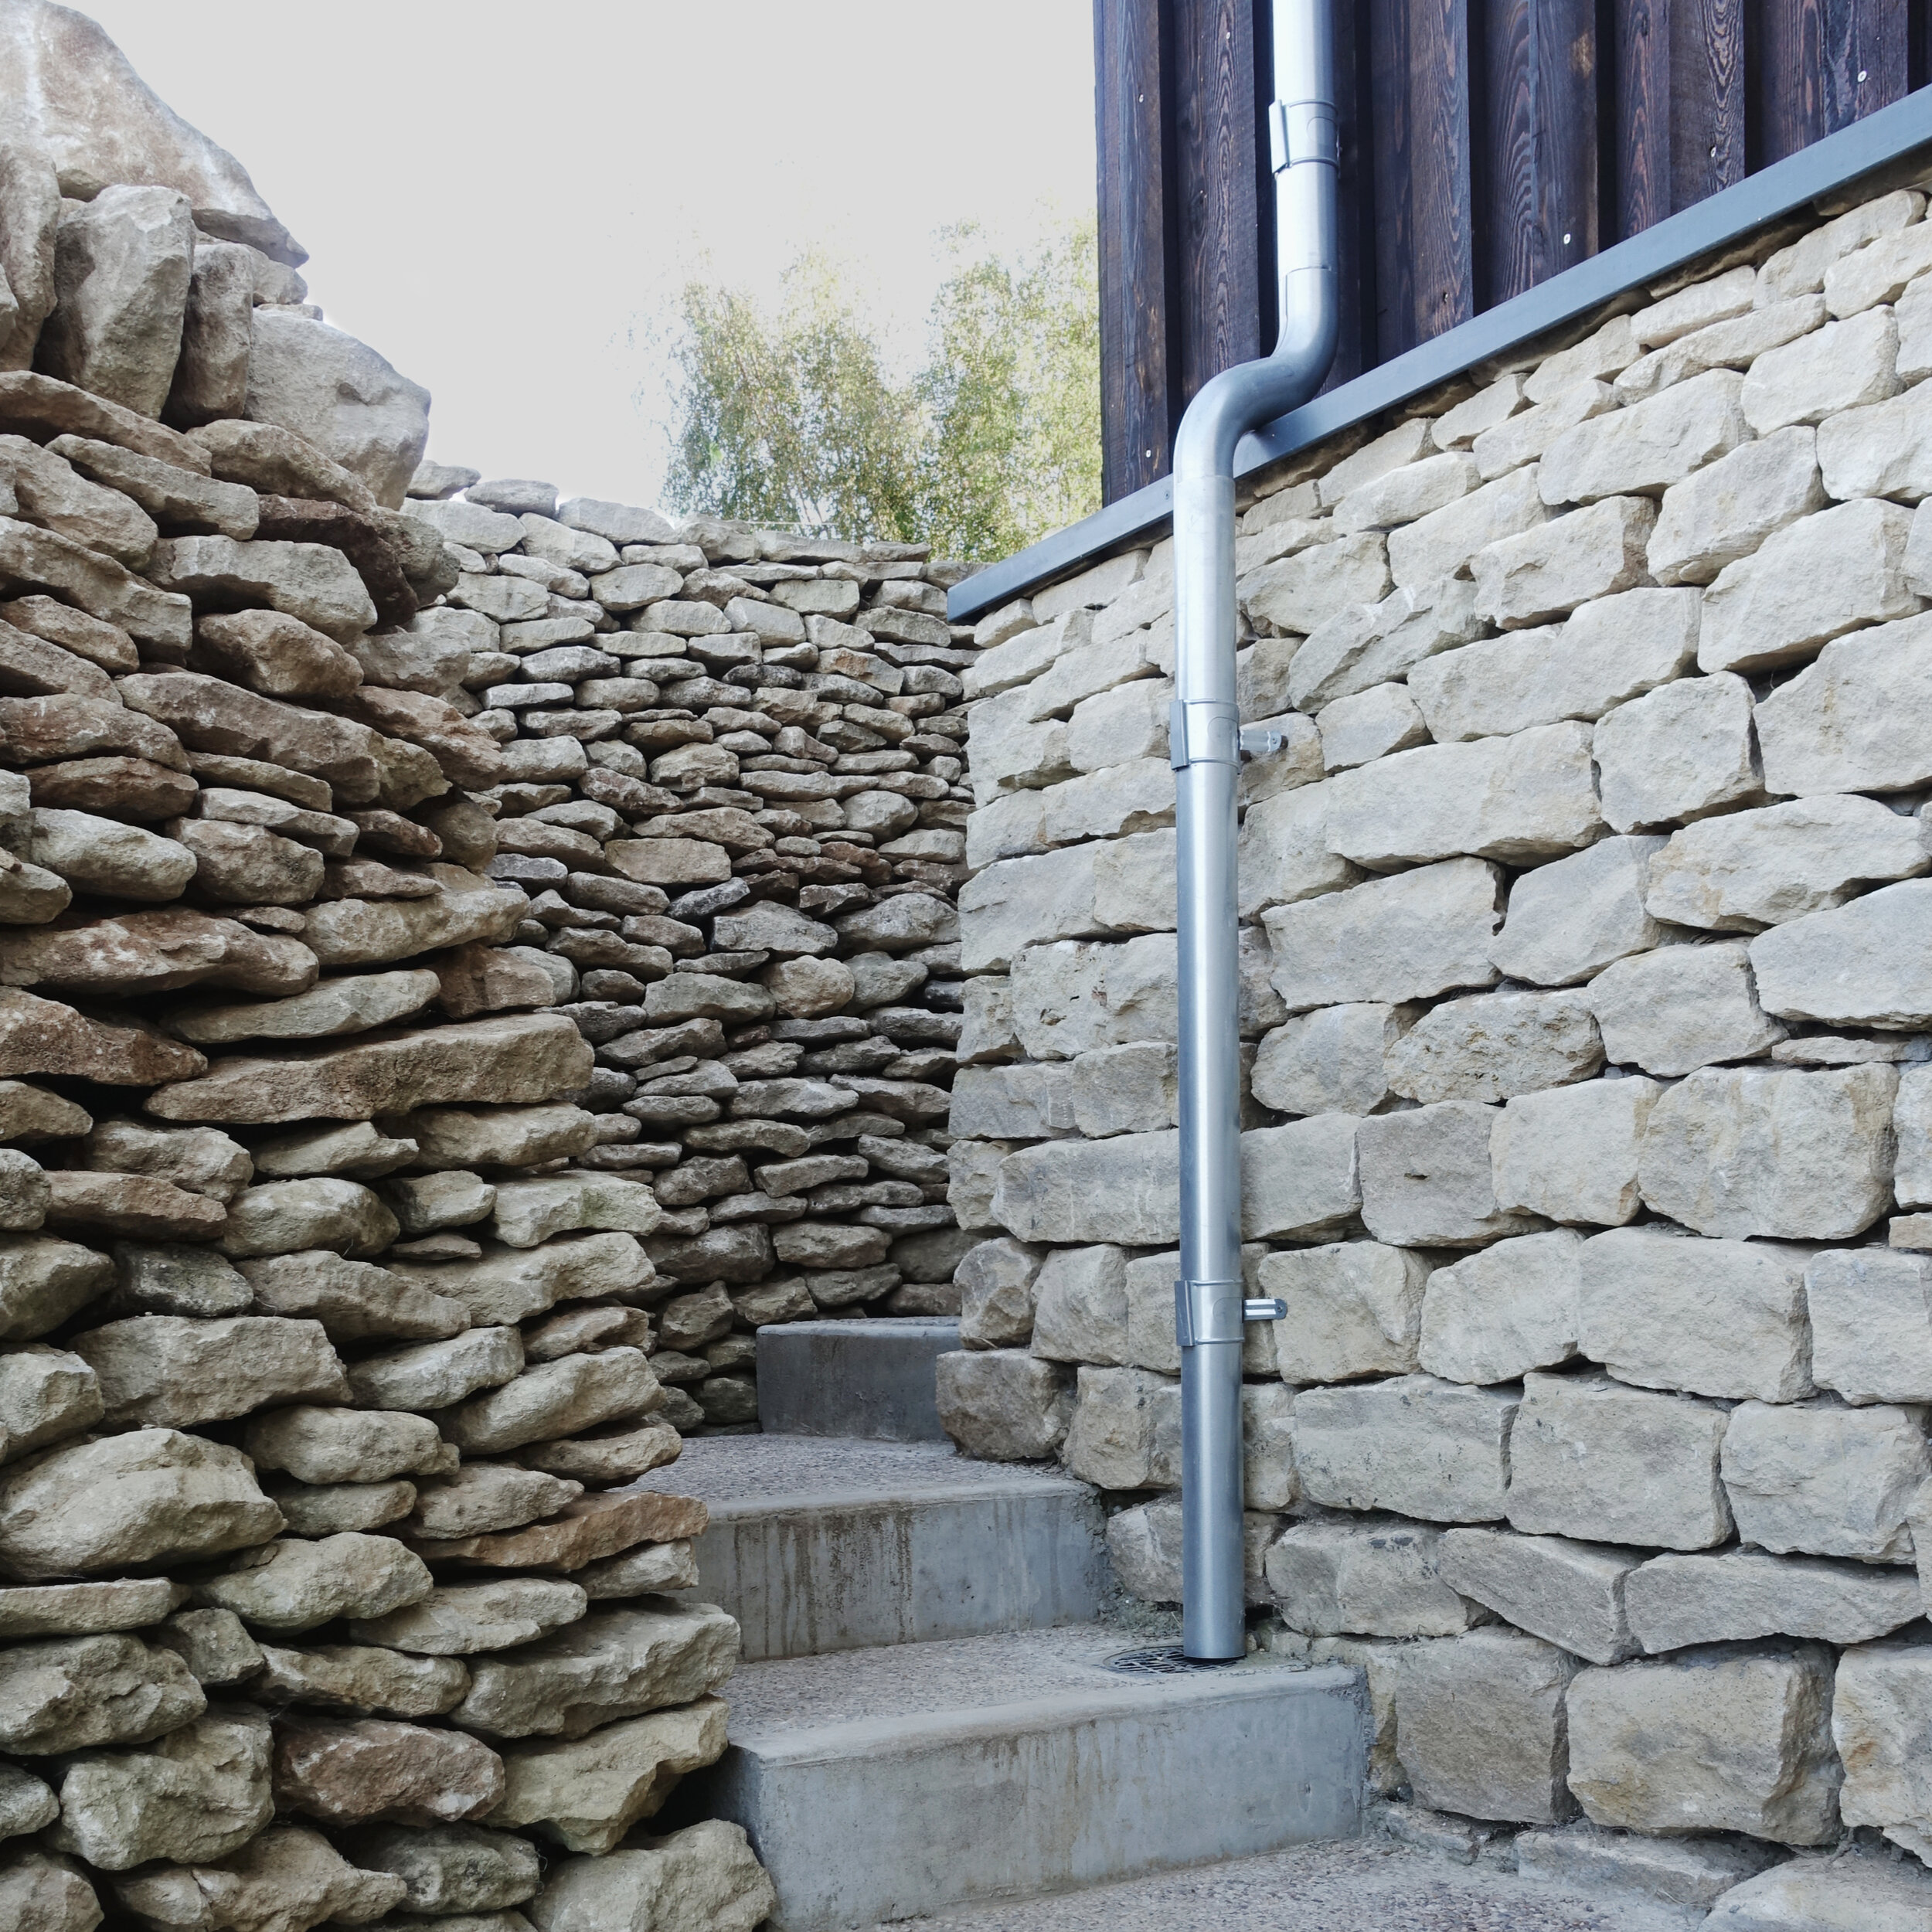    The dry-stone walling is particularly impressive when you realise that all the stone used has come from excavation on site and has been dressed and assembled by the client. We are really pleased that the materials and details have worked so well o